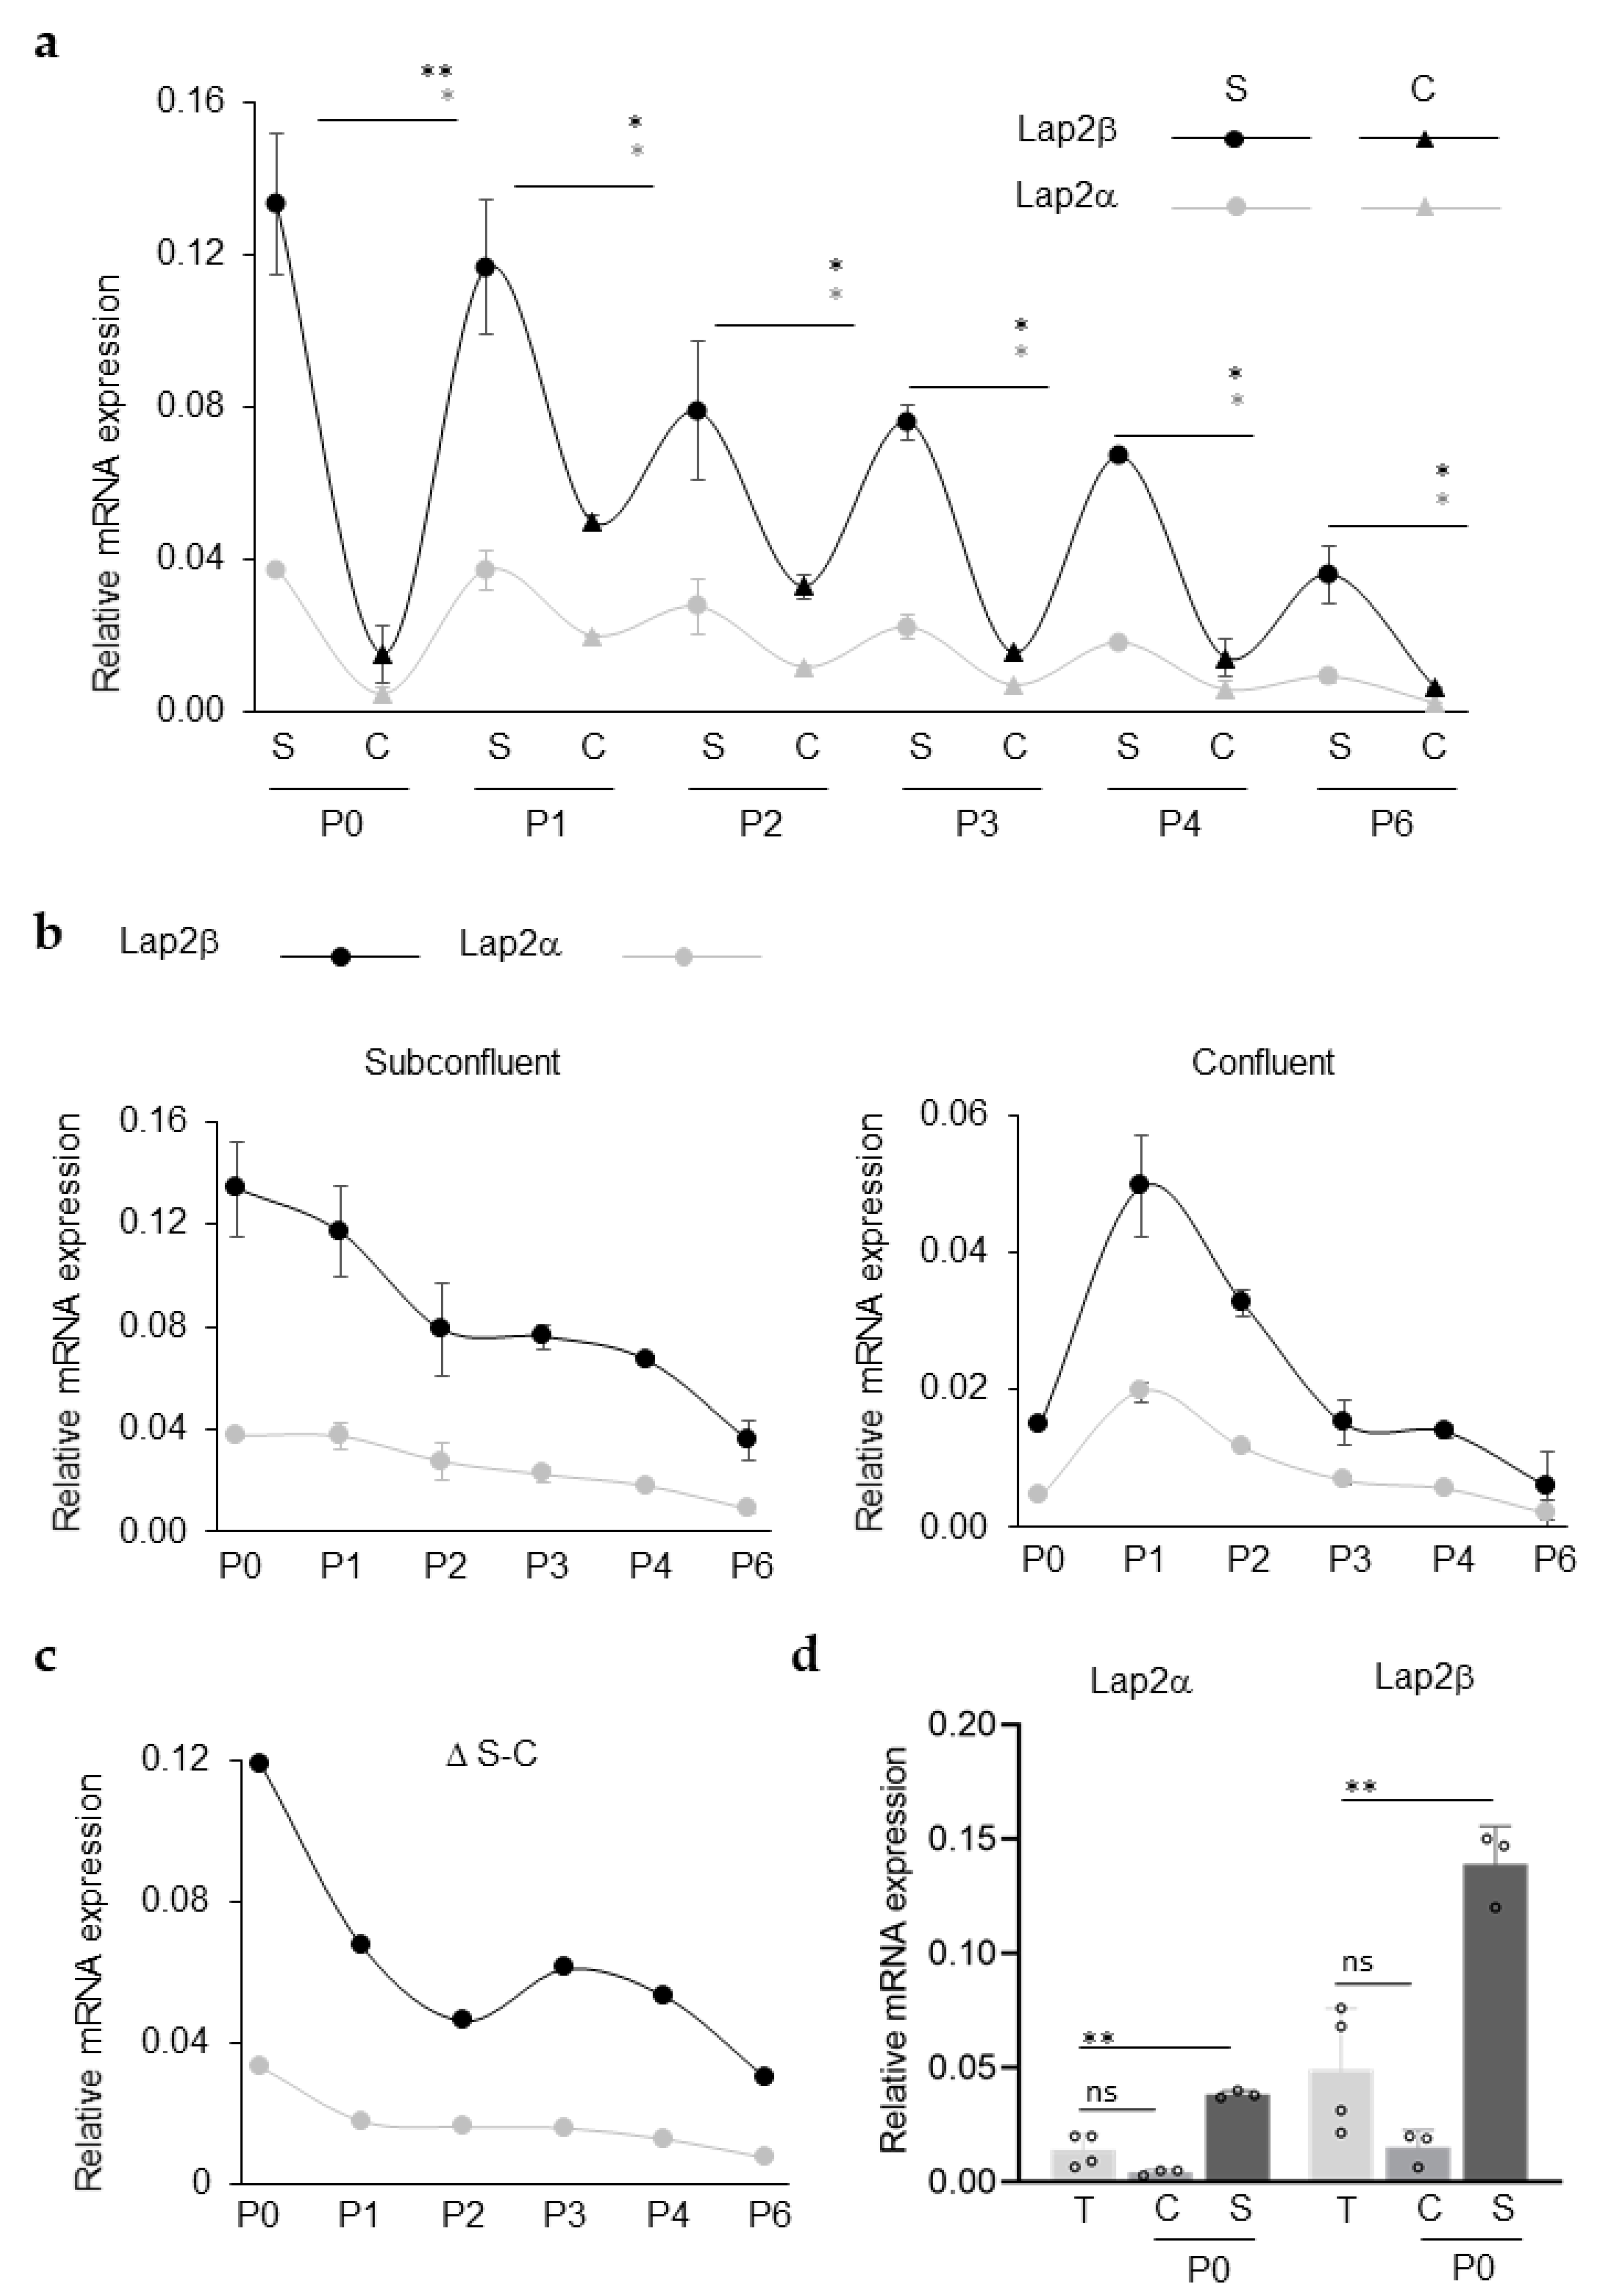 IJMS | Free Full-Text | Fluctuations in Corneal Endothelial LAP2 Expression  Levels Correlate with Passage Dependent Declines in Their Cell  Proliferative Activity | HTML